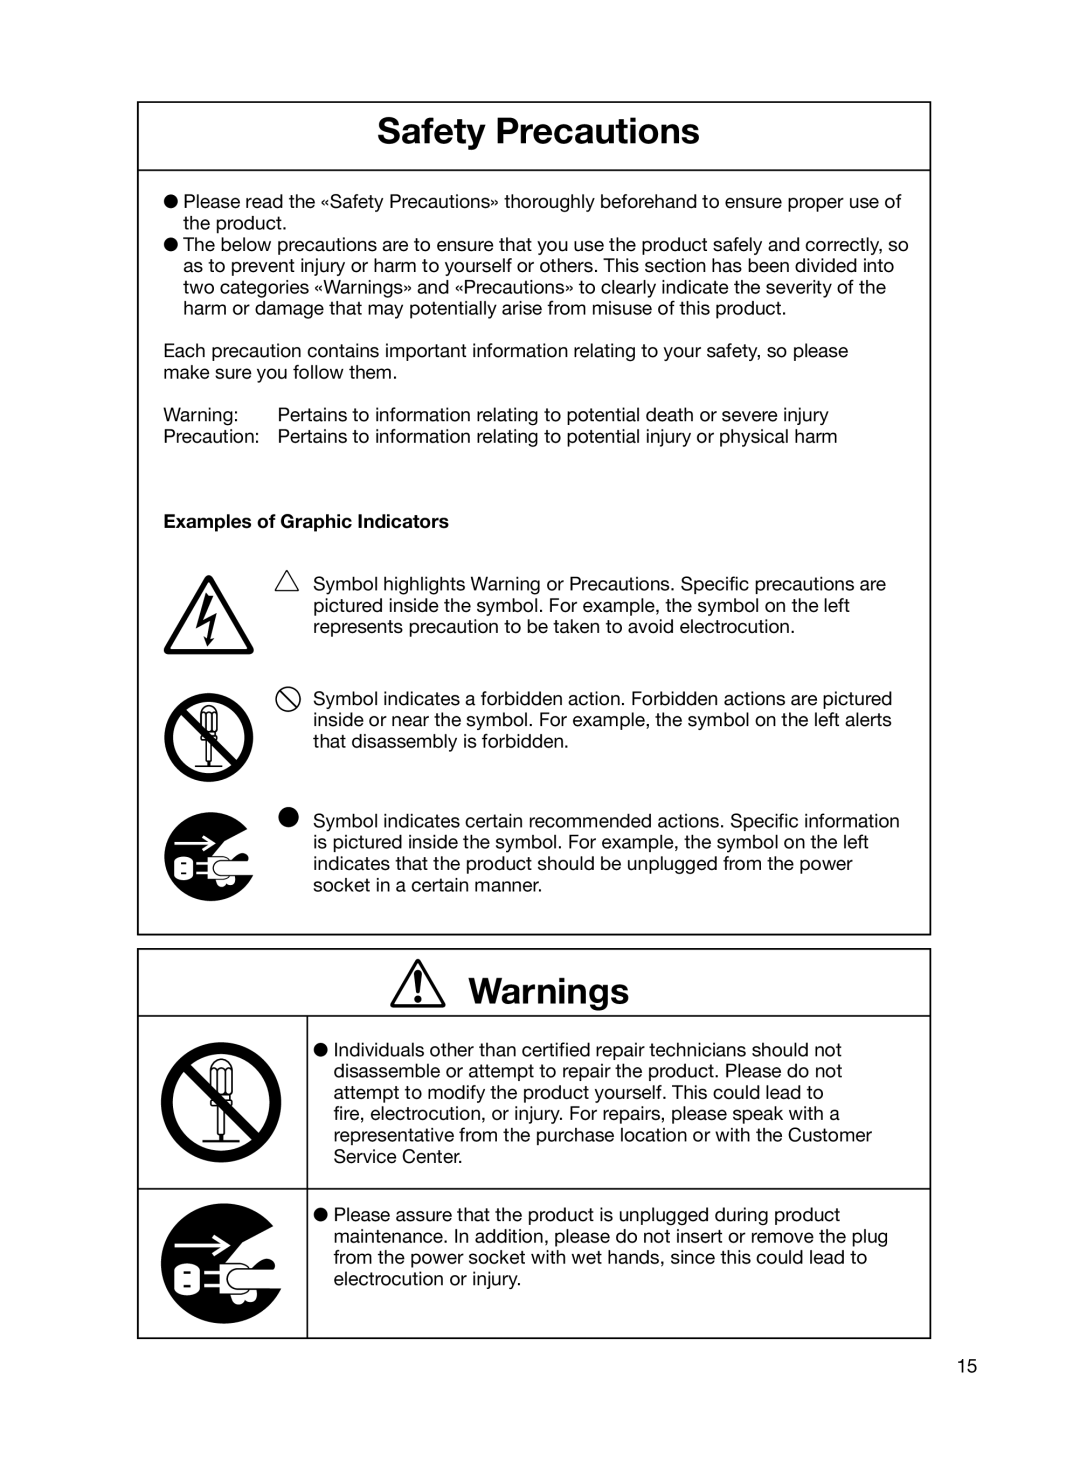 Braun 8000 warranty Safety Precautions, Warnings, Examples of Graphic Indicators 